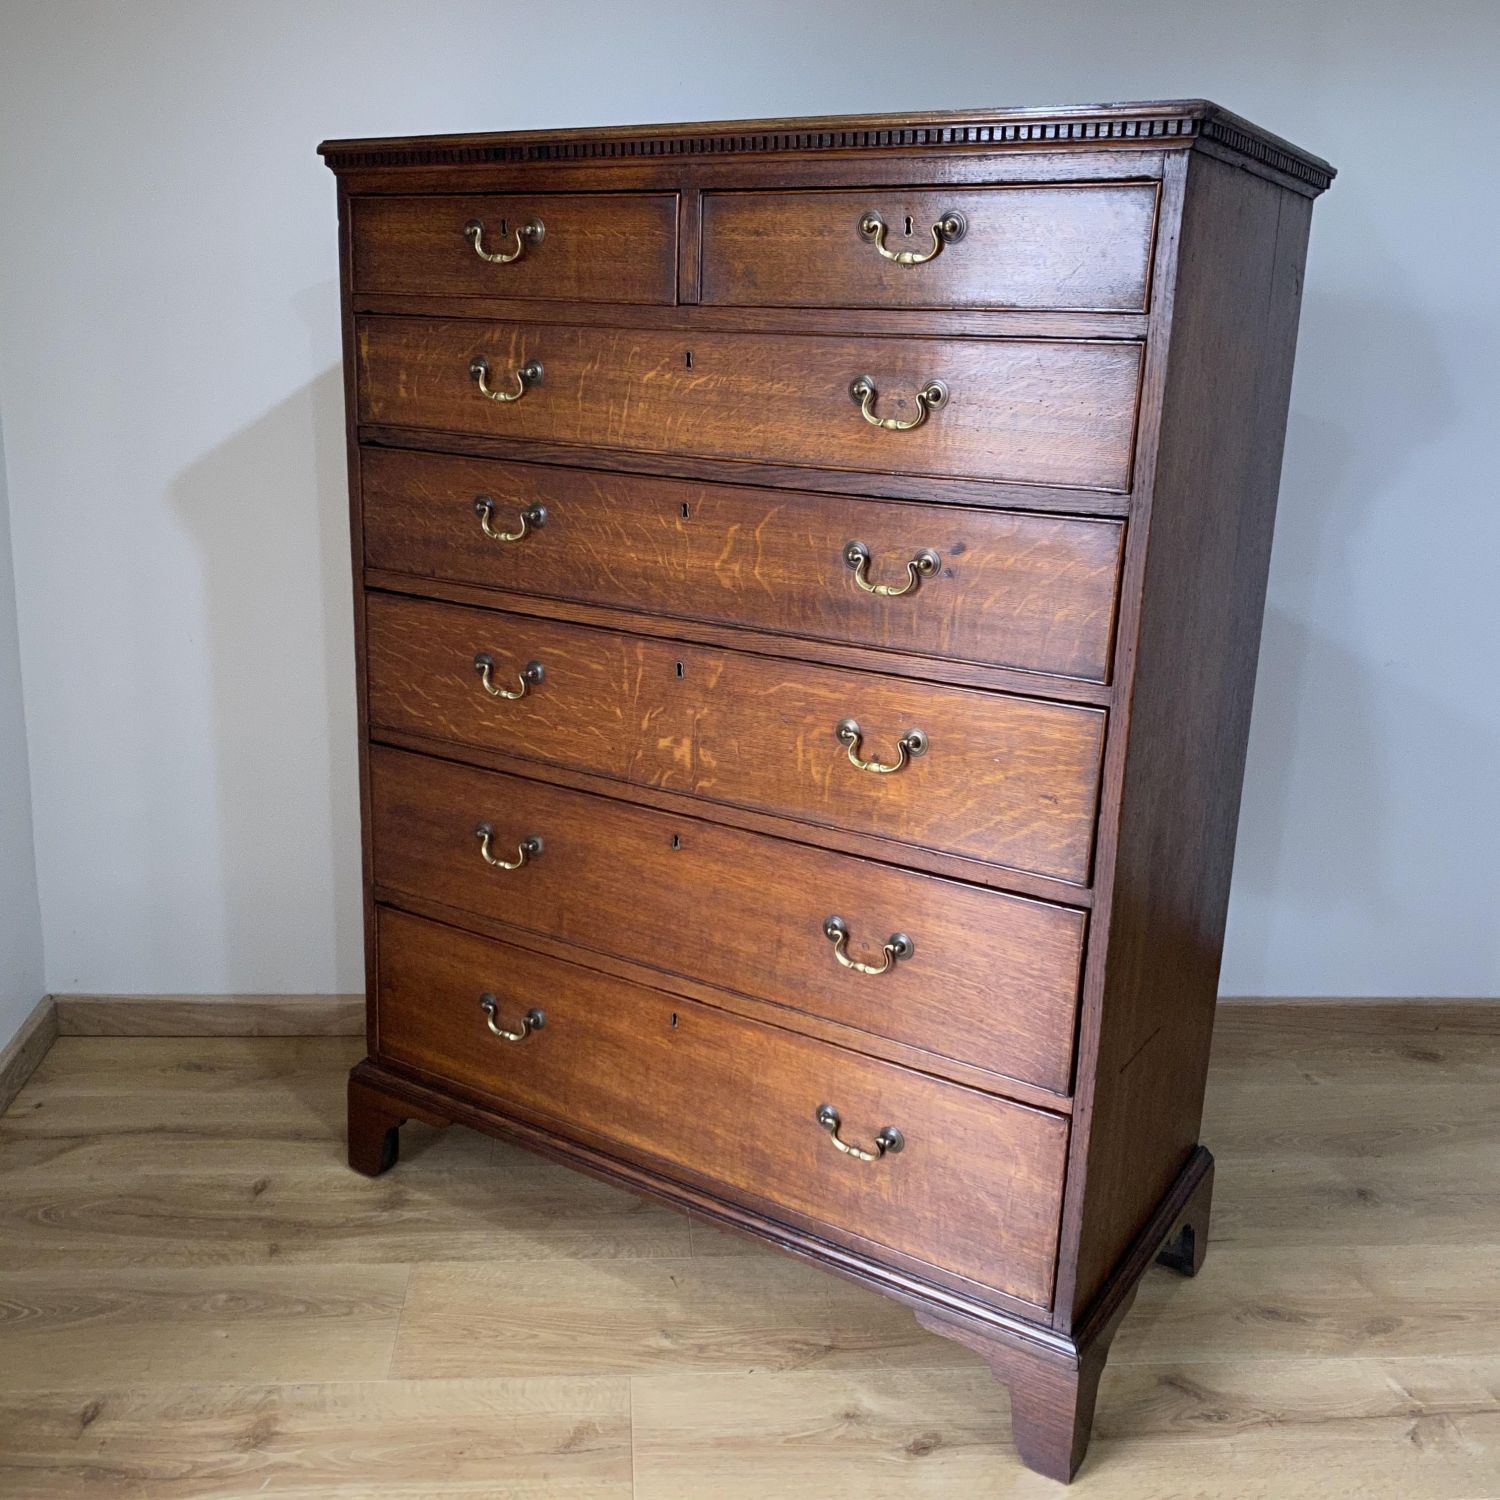 Superb Tall 7 Drawer Mahogany Chest Wide Tall Chest